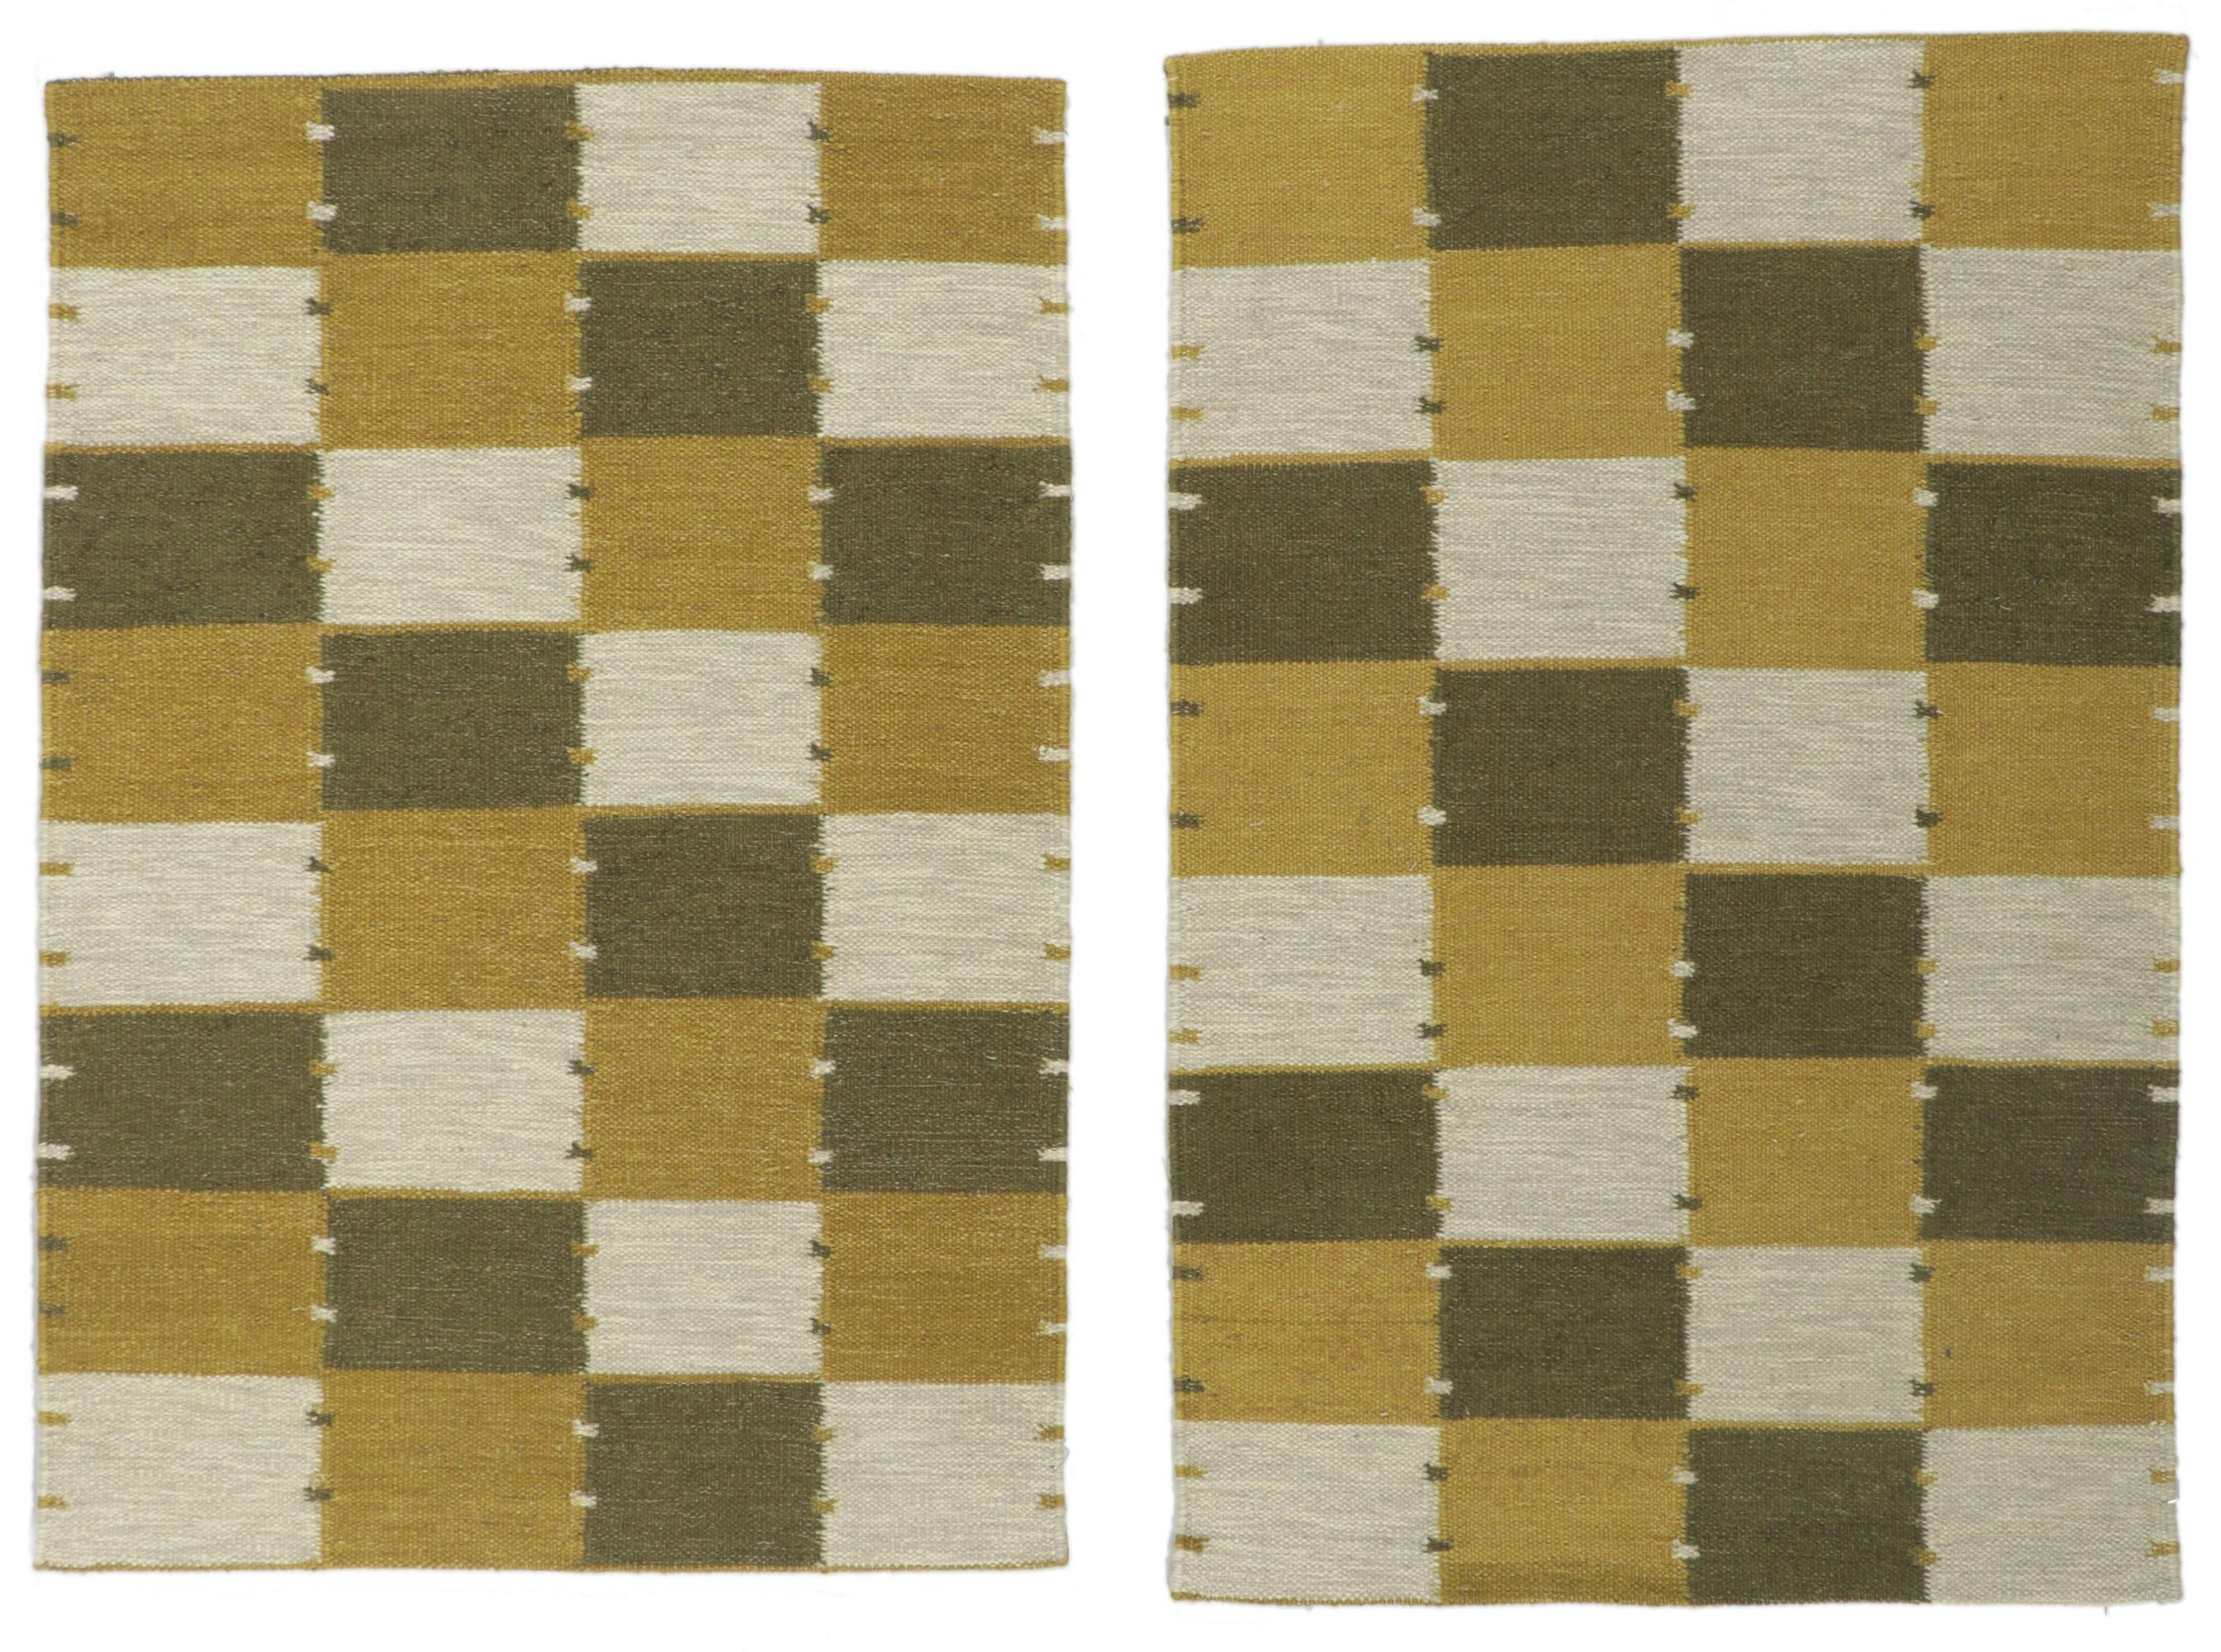 New Pair of Matching Swedish Inspired Kilim Rugs For Sale 1